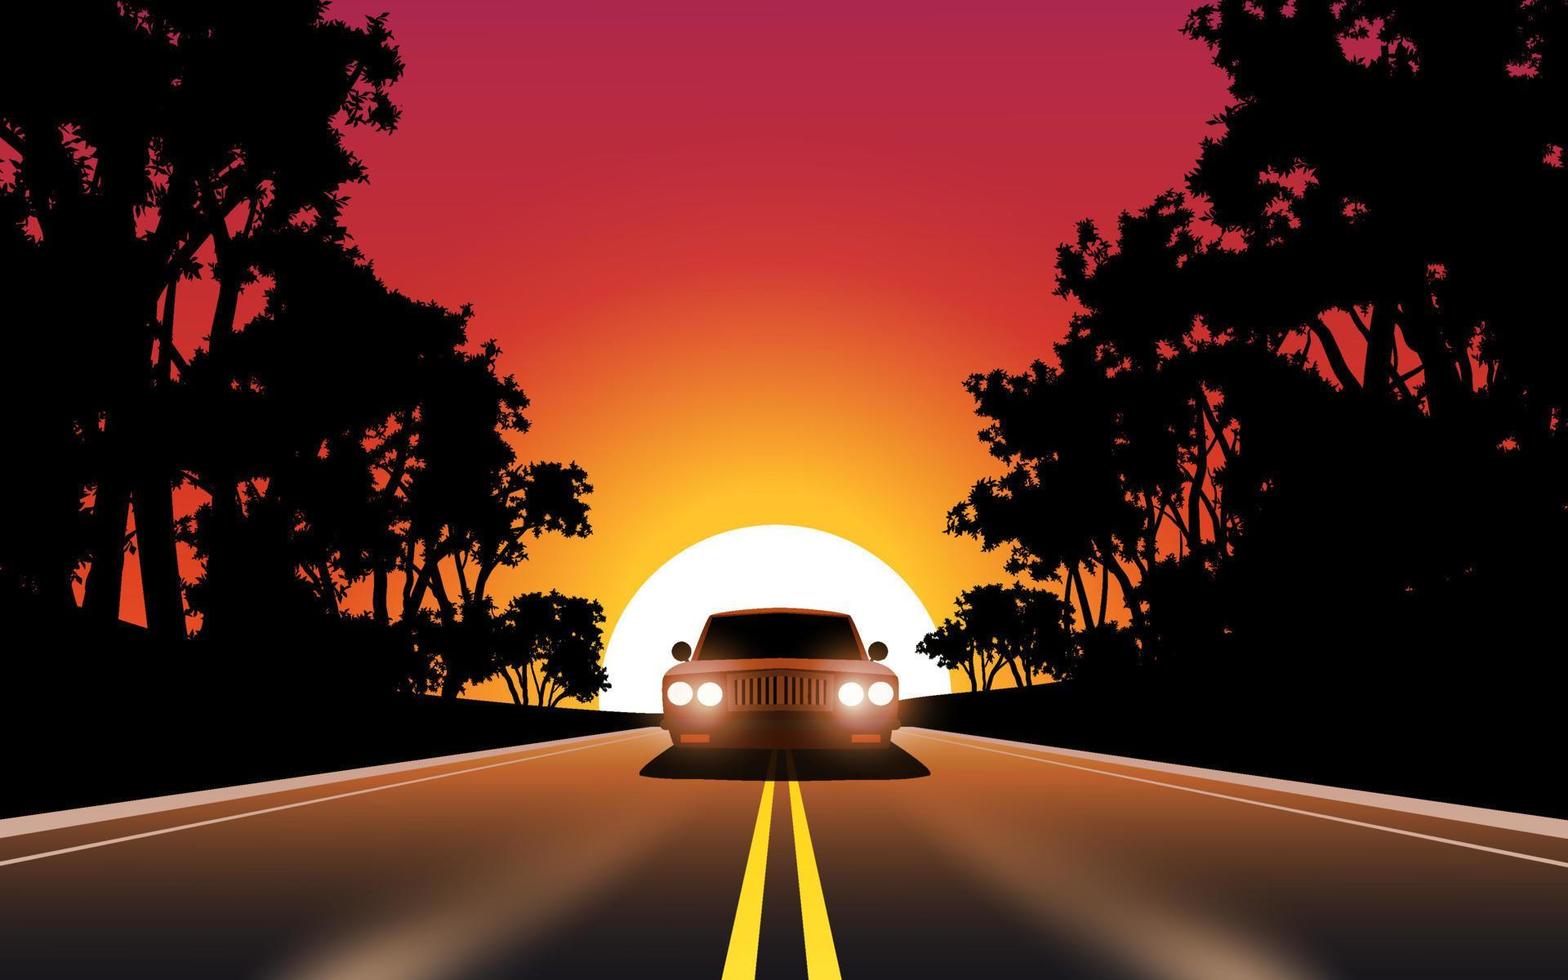 Car sunset driving vector illustration. A car running on highway at sunset